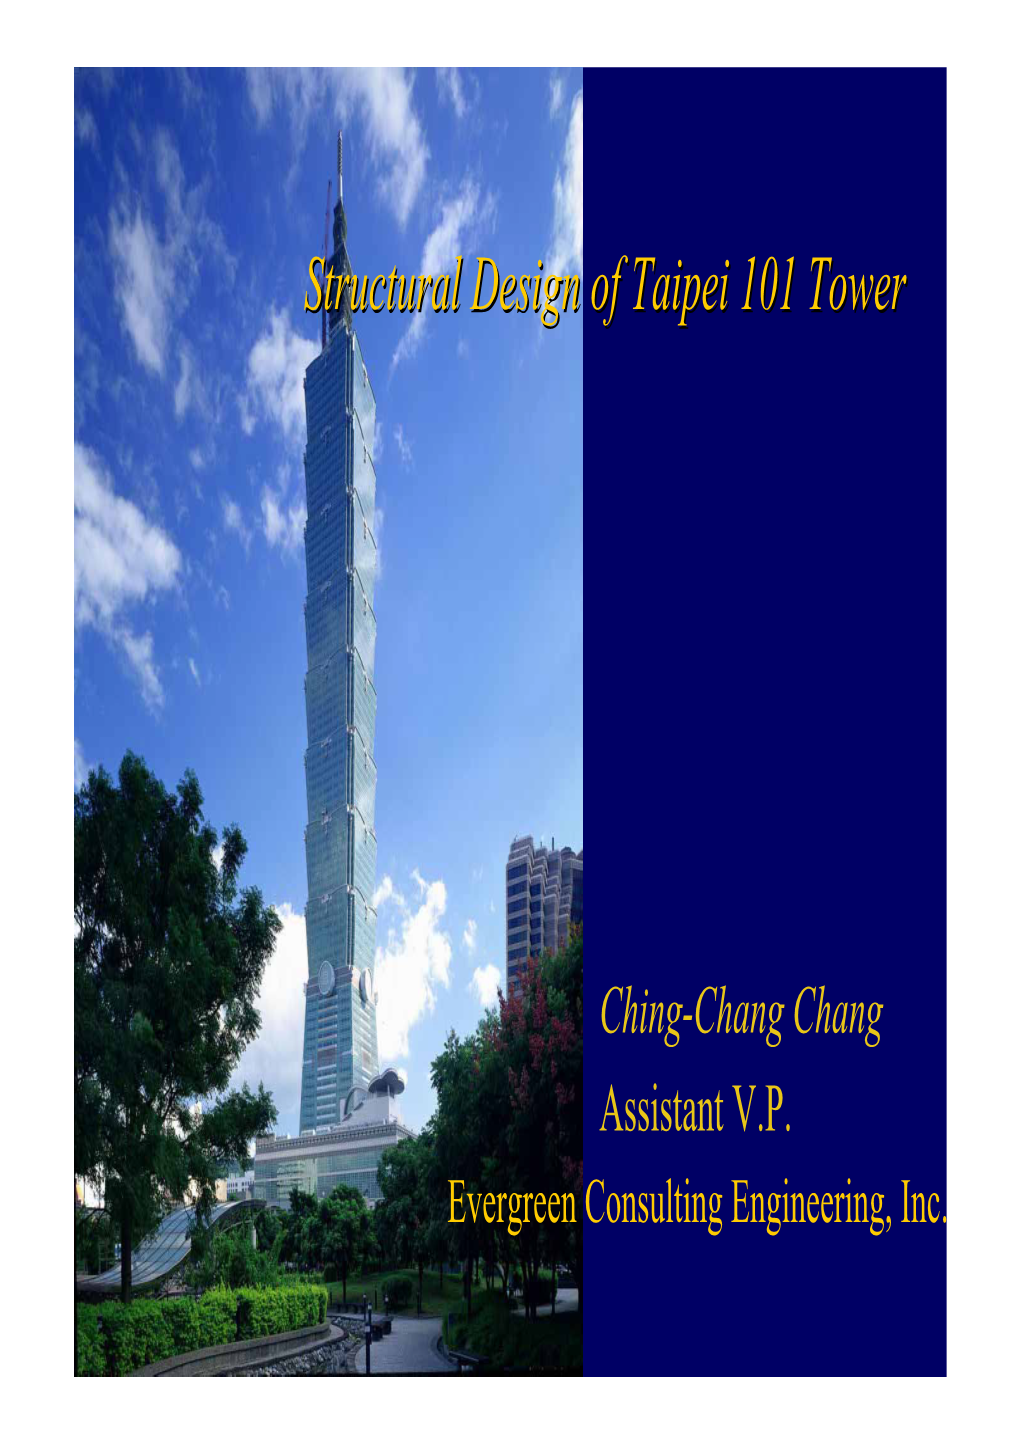 Structural Design of Taipei 101 Tower